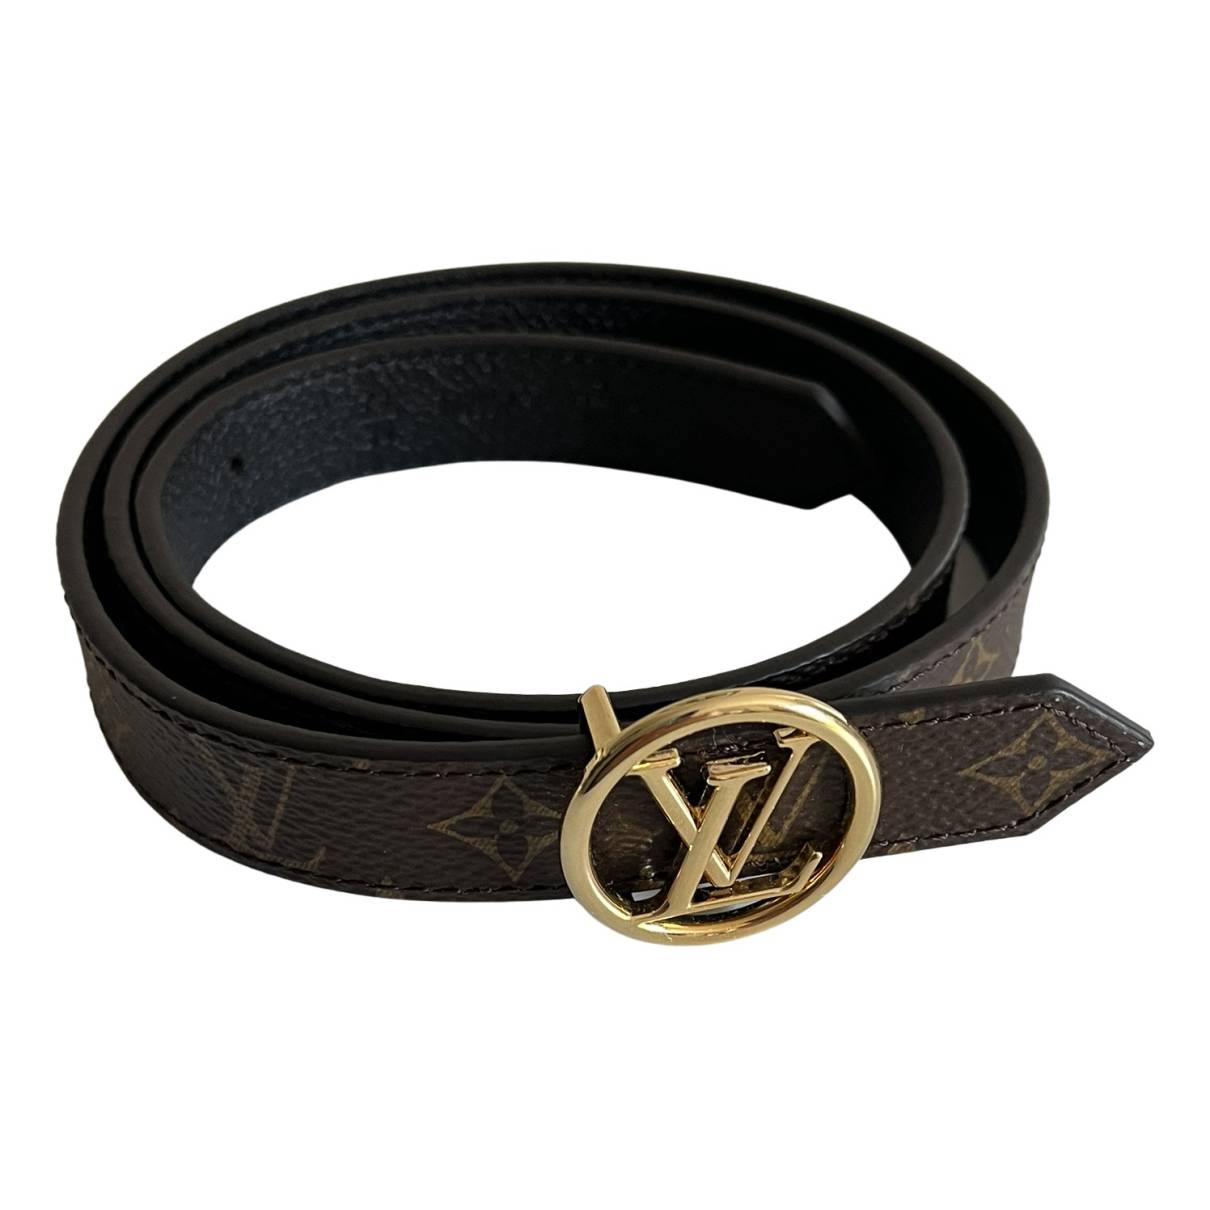 Lv circle leather belt Louis Vuitton Brown size 75 cm in Leather - 31625125